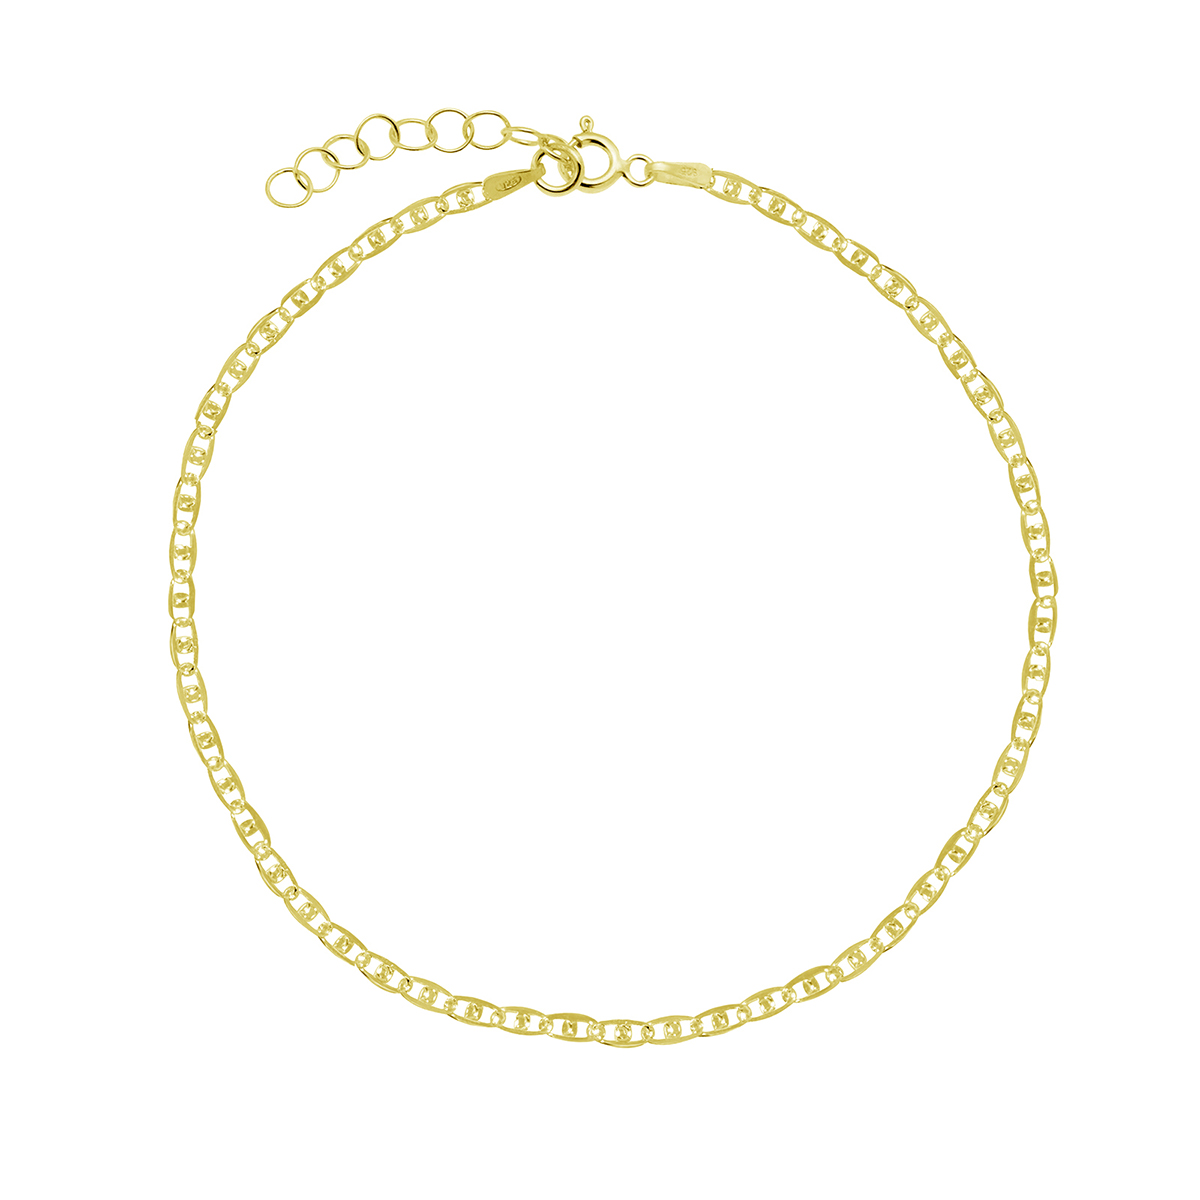 Barefootsies Mariner Chain Anklet Gold Plating Over Sterling